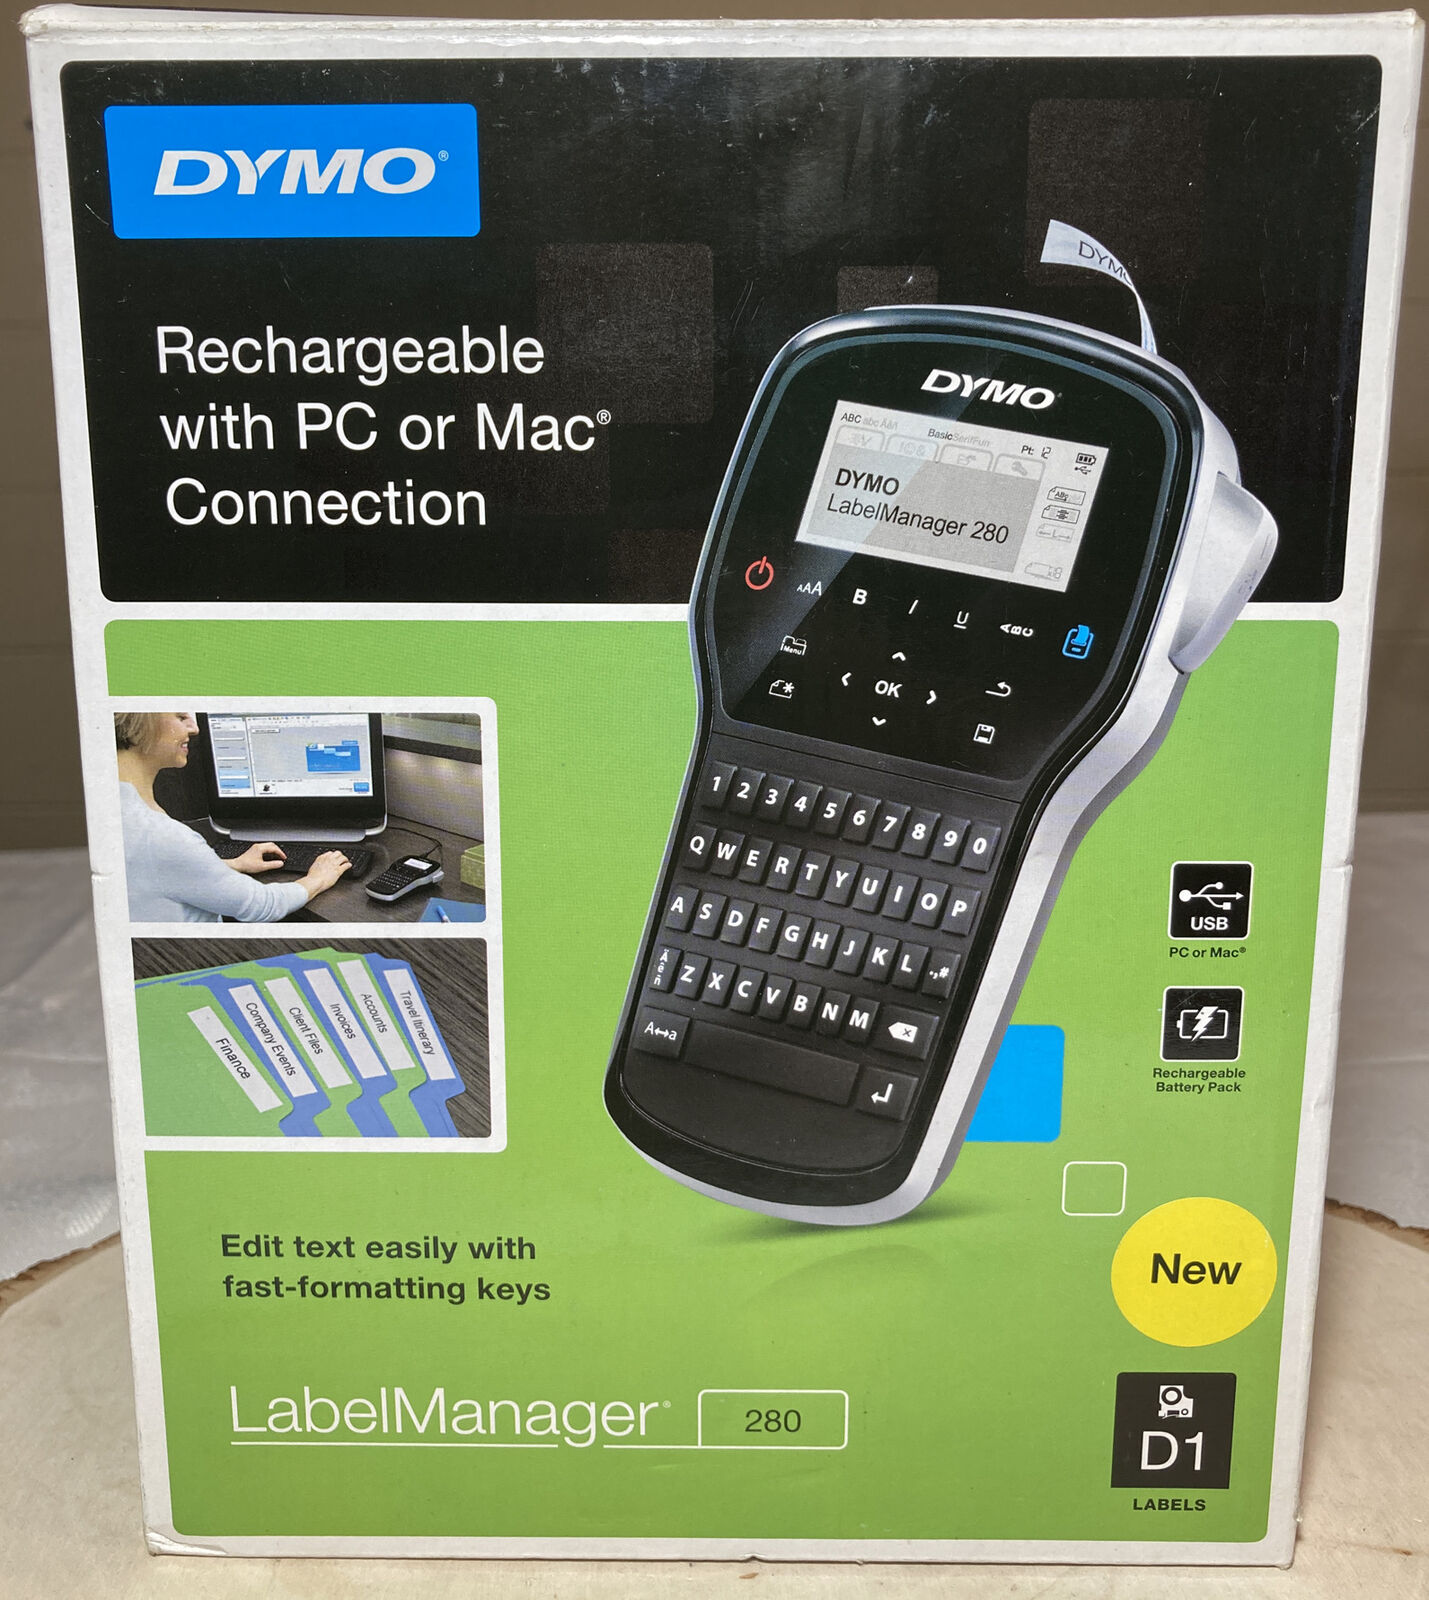 Dymo Label Manager 280 - Rechargeable Usb Handheld Labeler - New! - Open Box